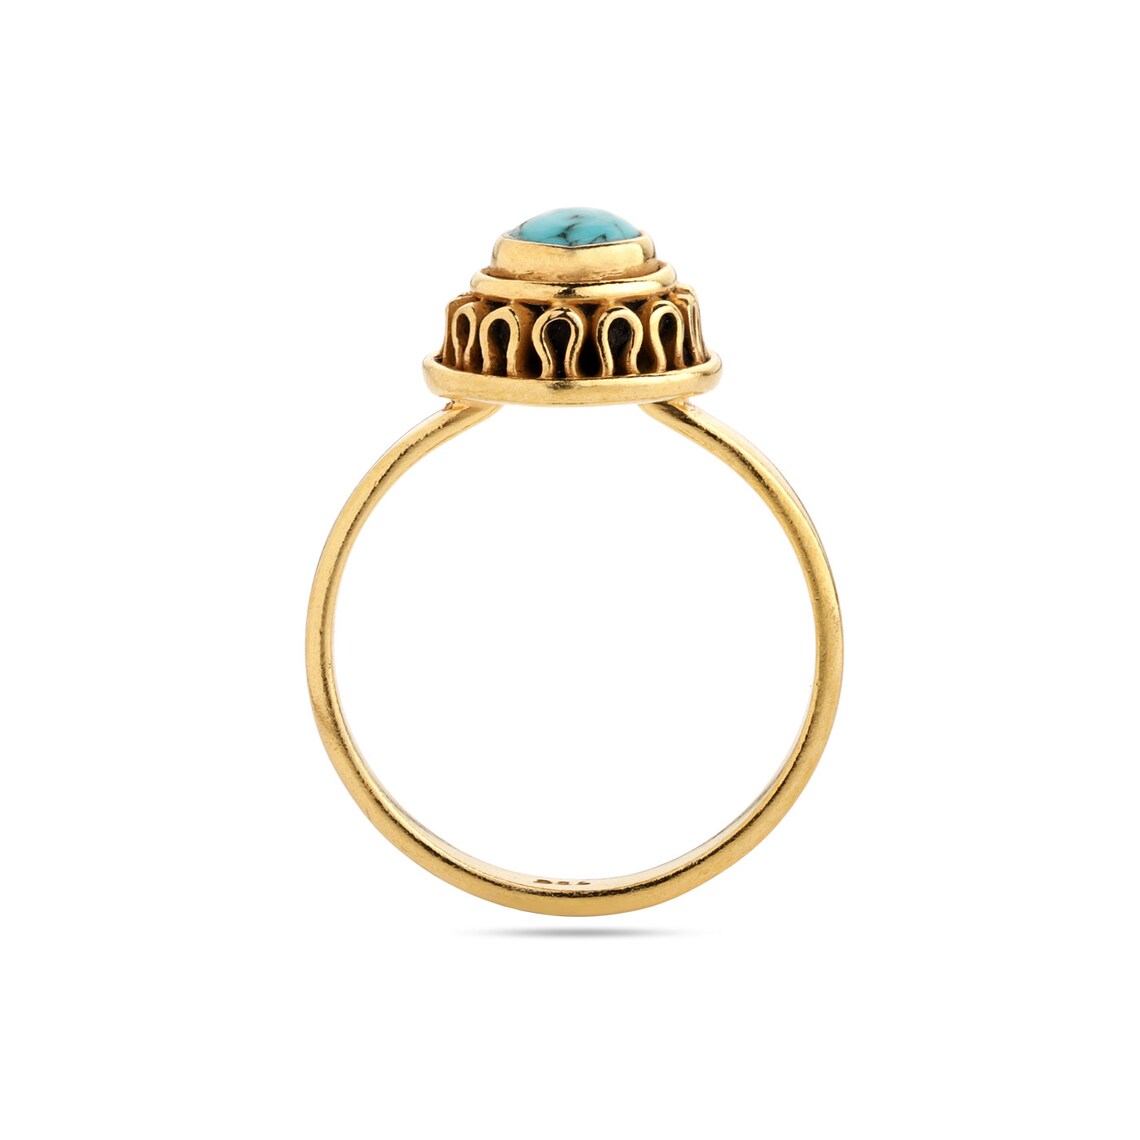 Designer 925 Sterling Silver Turquoise Gold Plated Ring